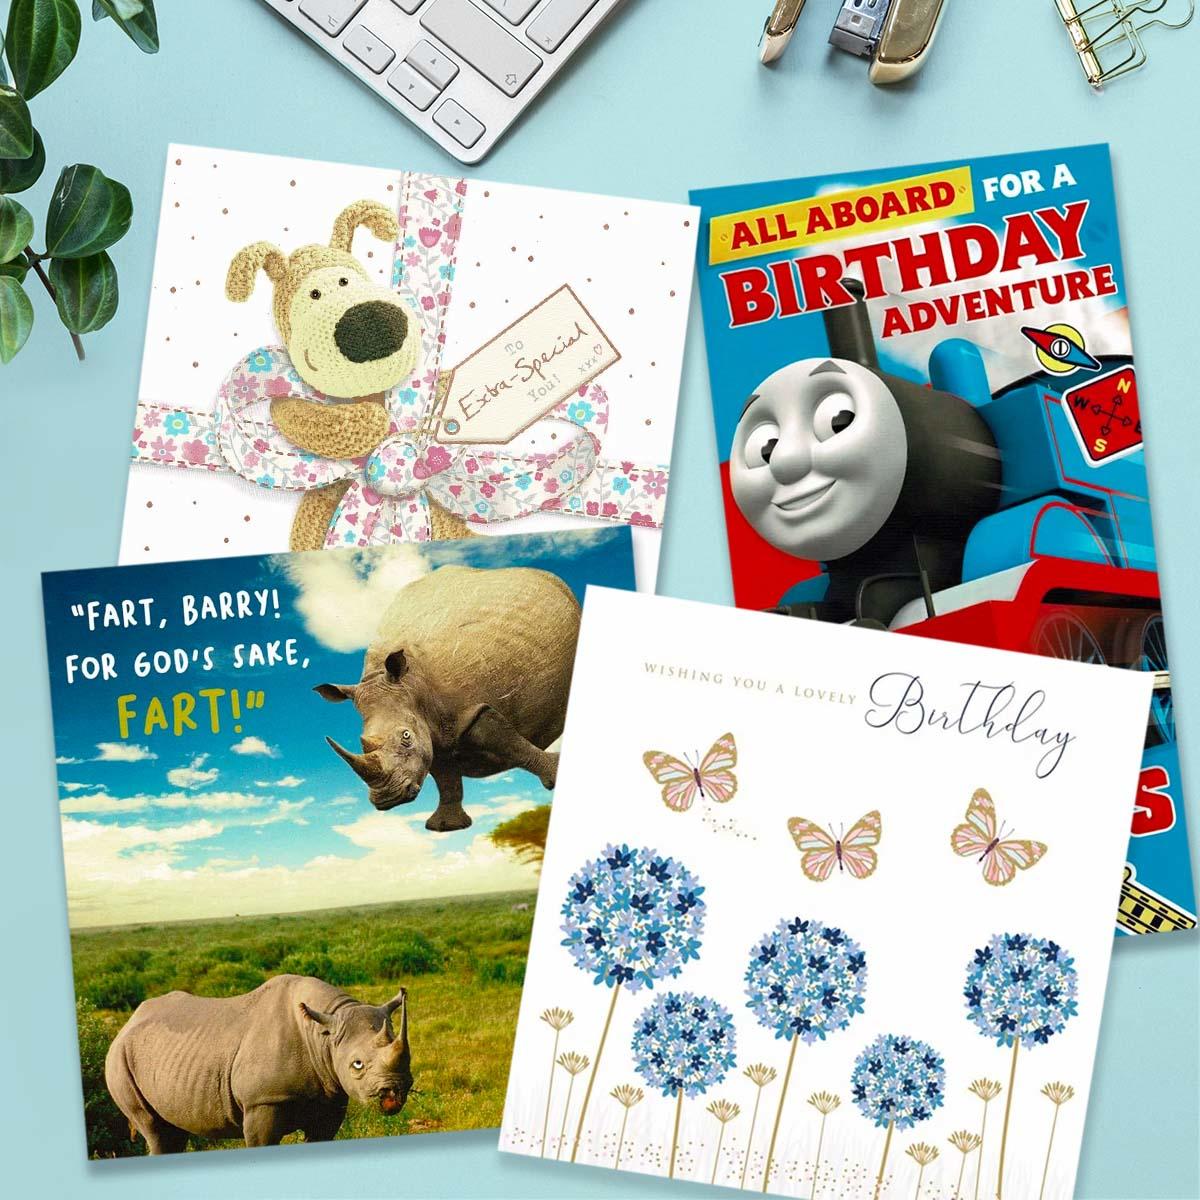 A Selection Of Cards To Show The Depth Of Range In Our General Birthday Card Section